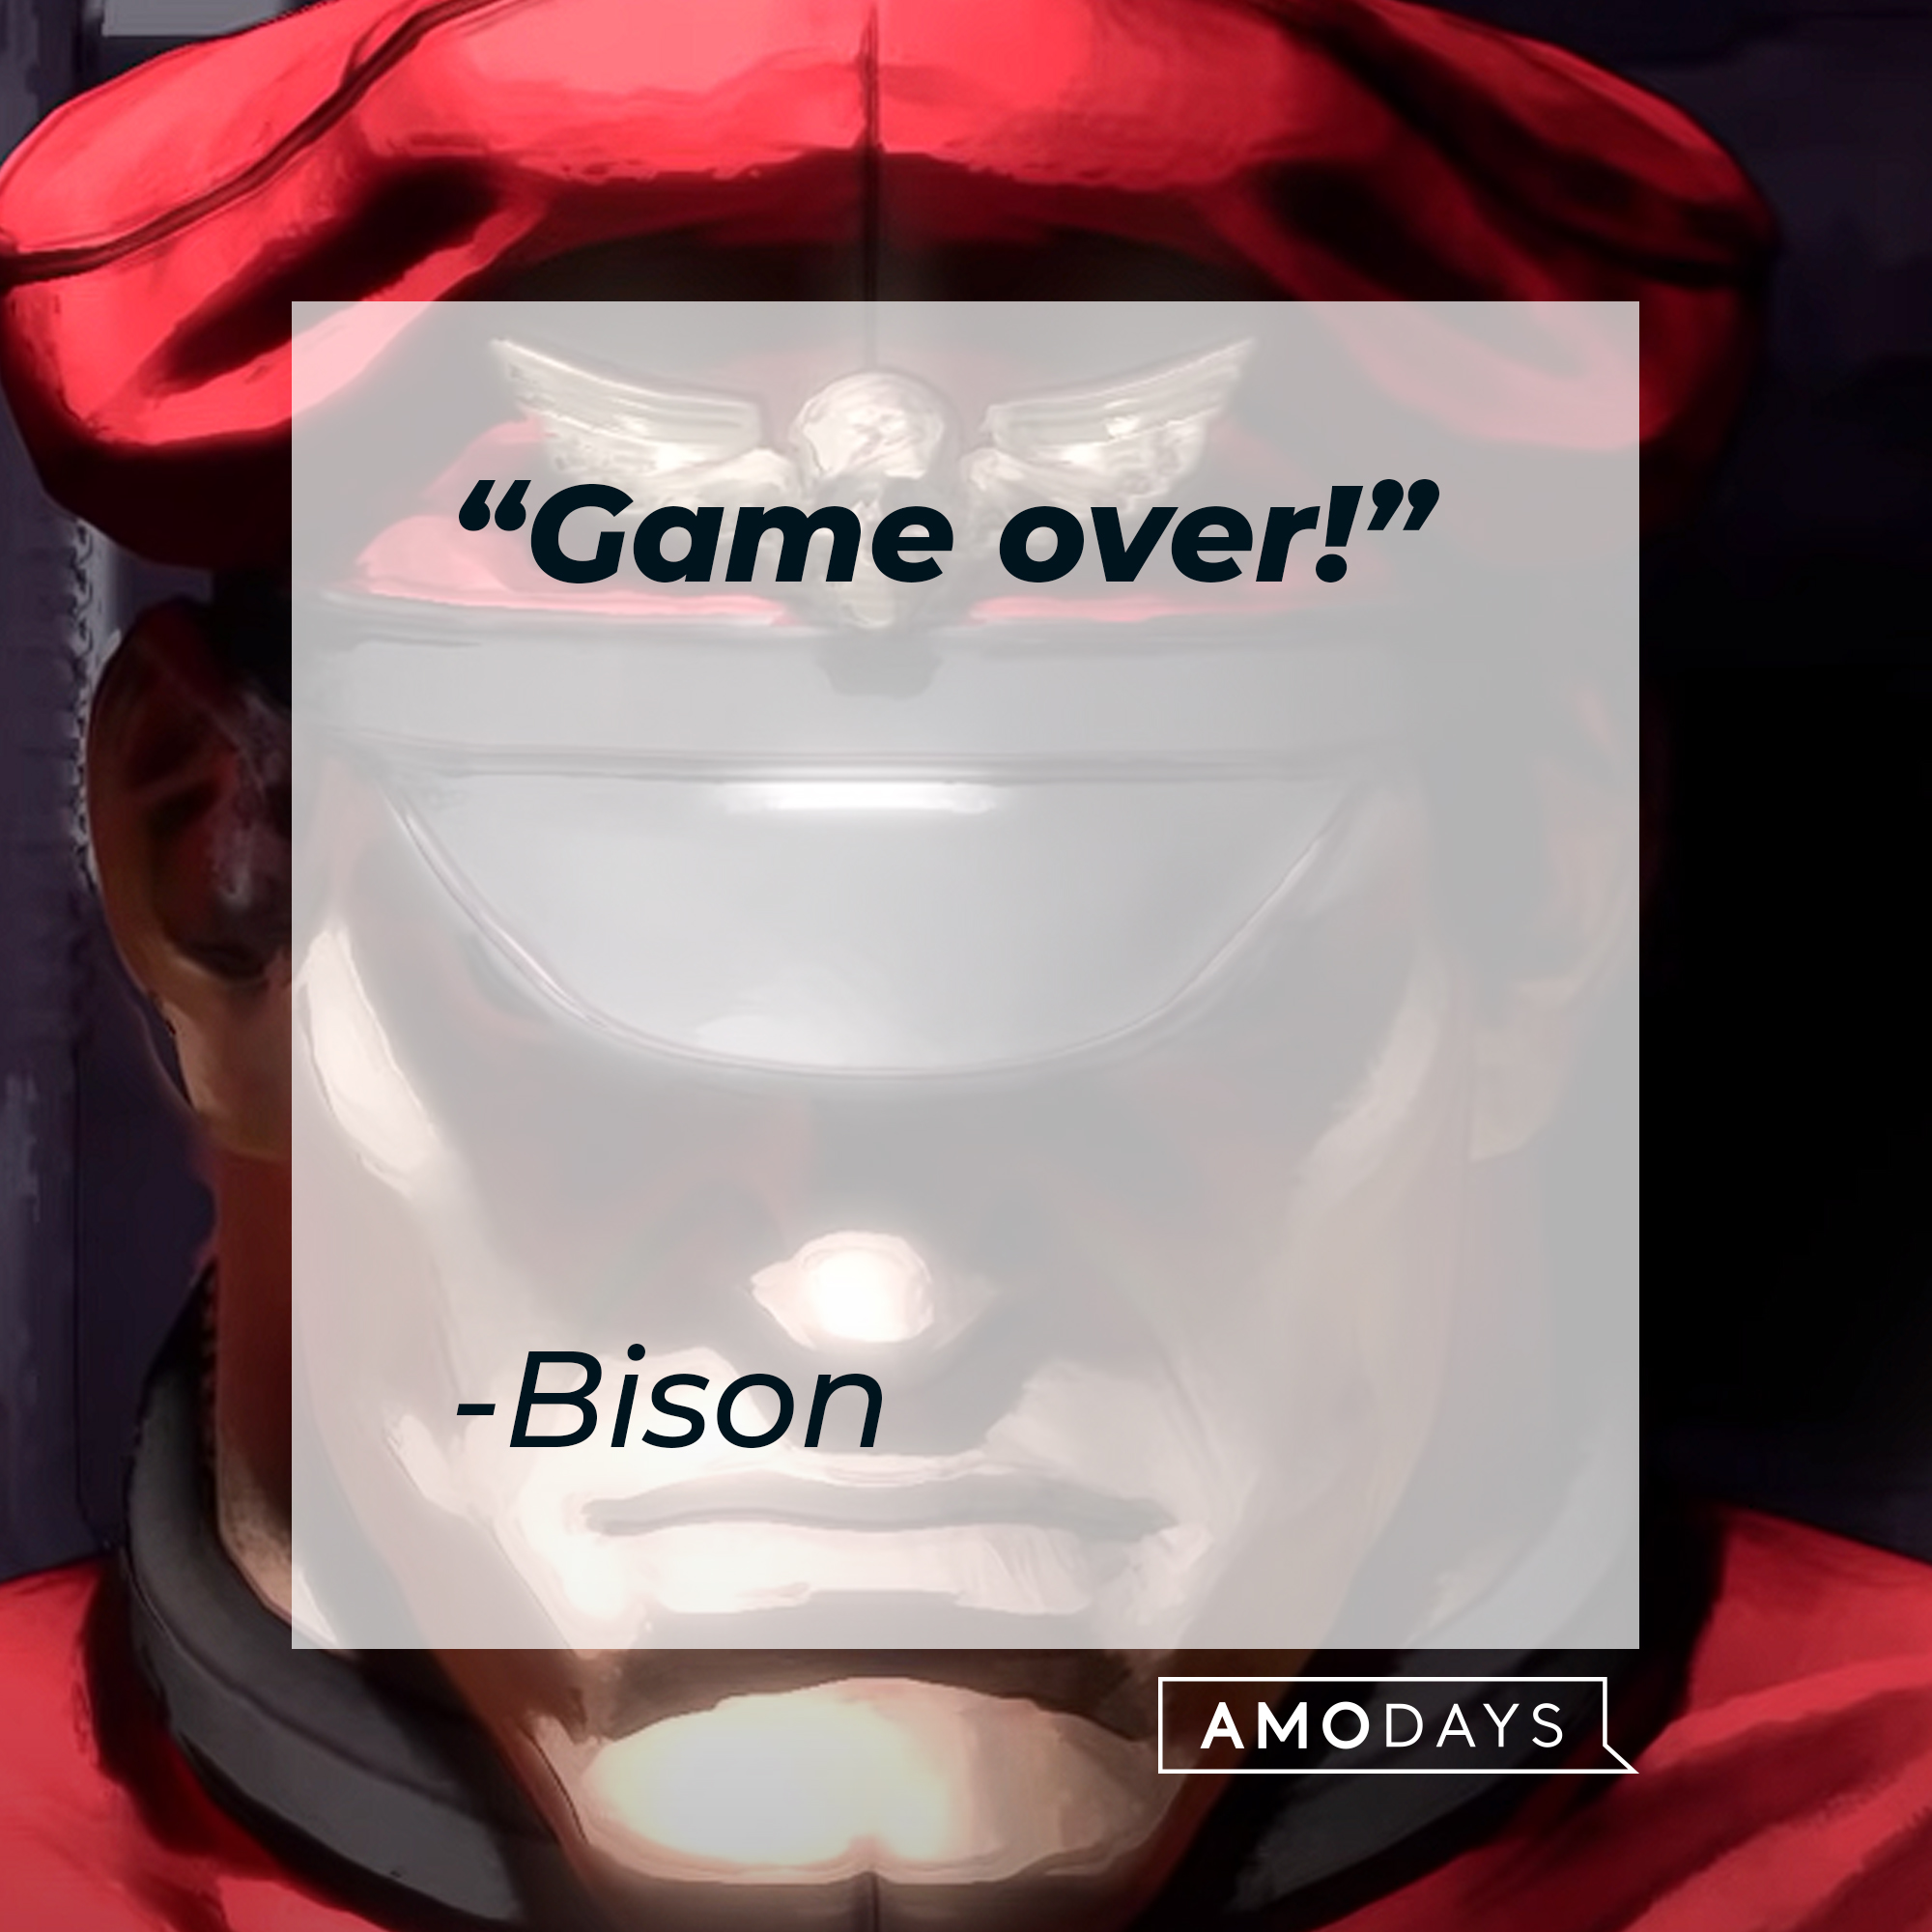 Bison's quote: "Game over!" | Source: youtube.com/PlayStation